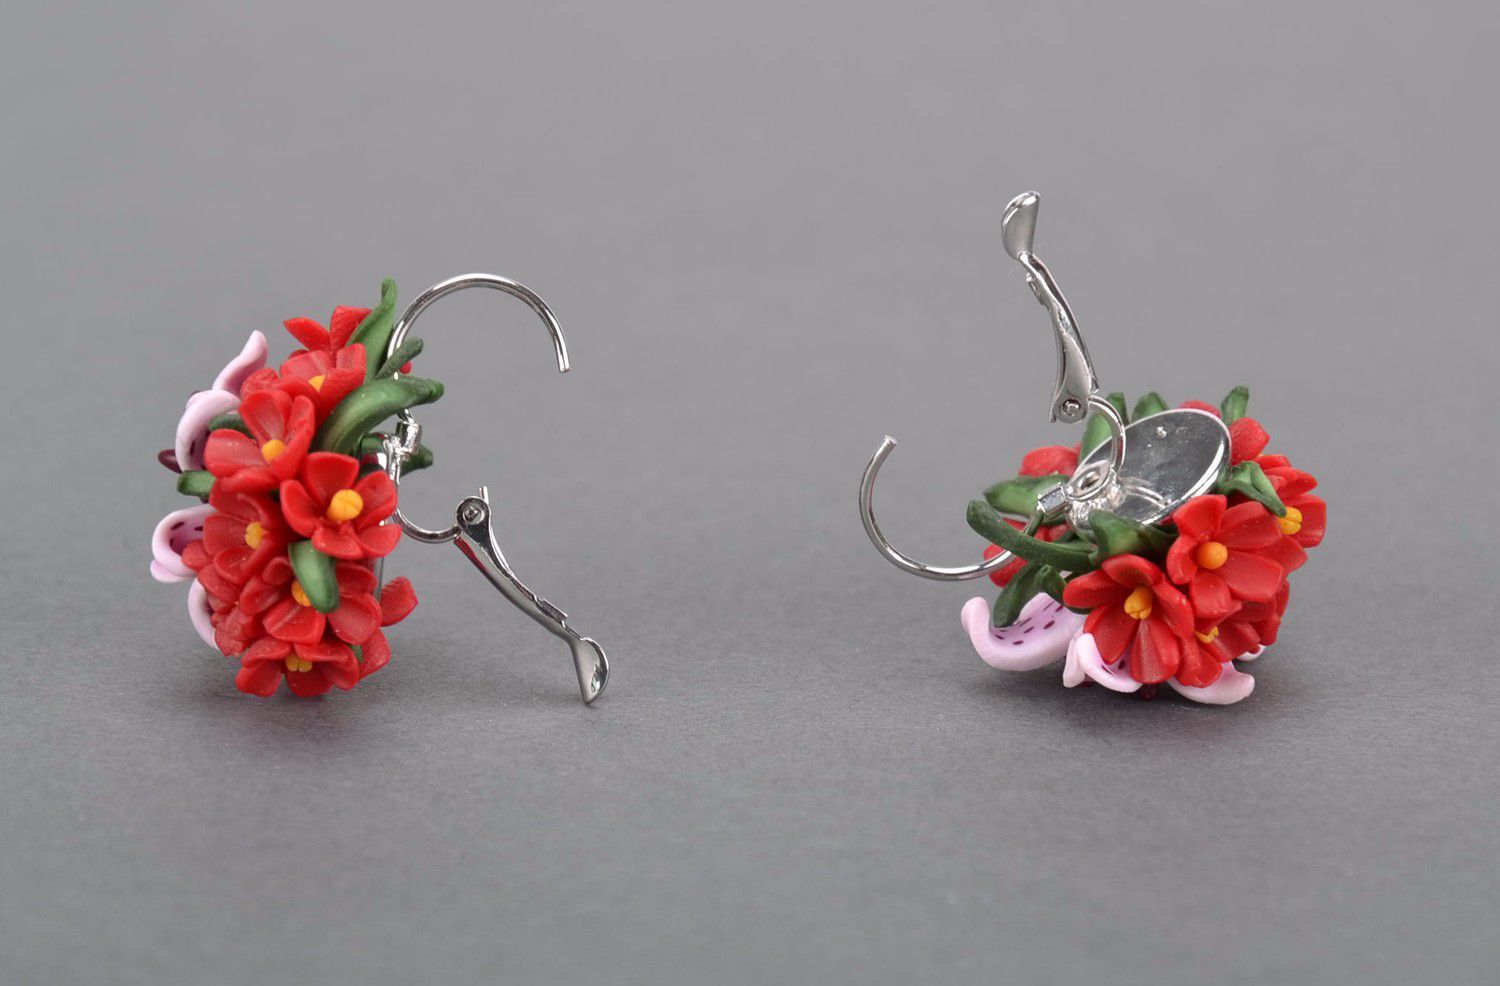 Handmade earrings made from polymer clay photo 4